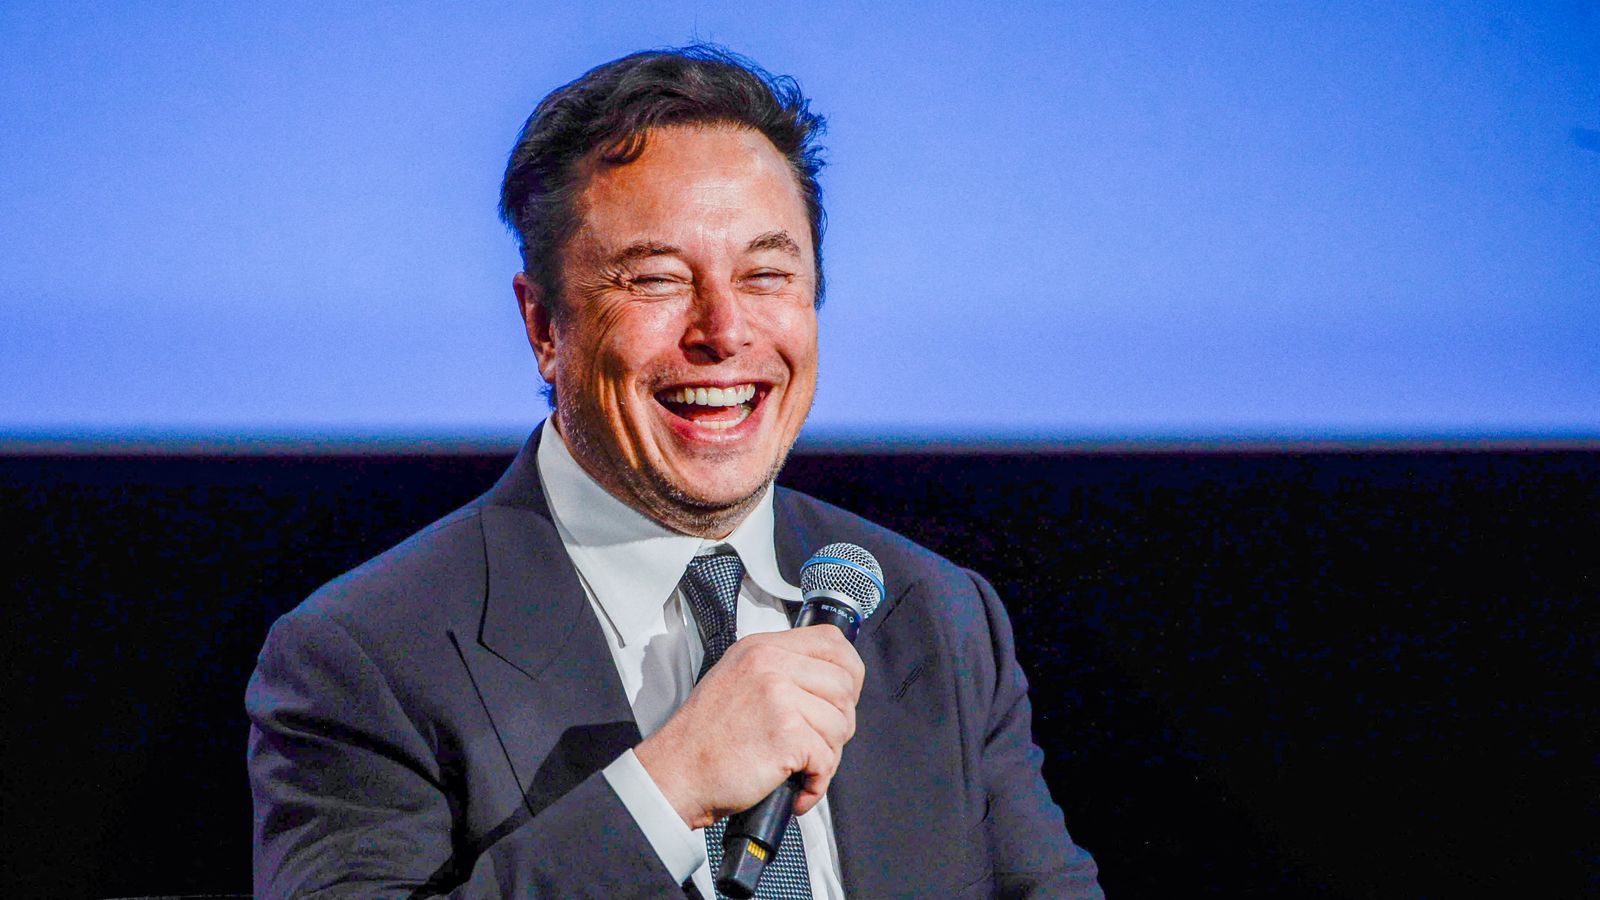 Elon Musk donated £1.6bn in Tesla stock to charity last year